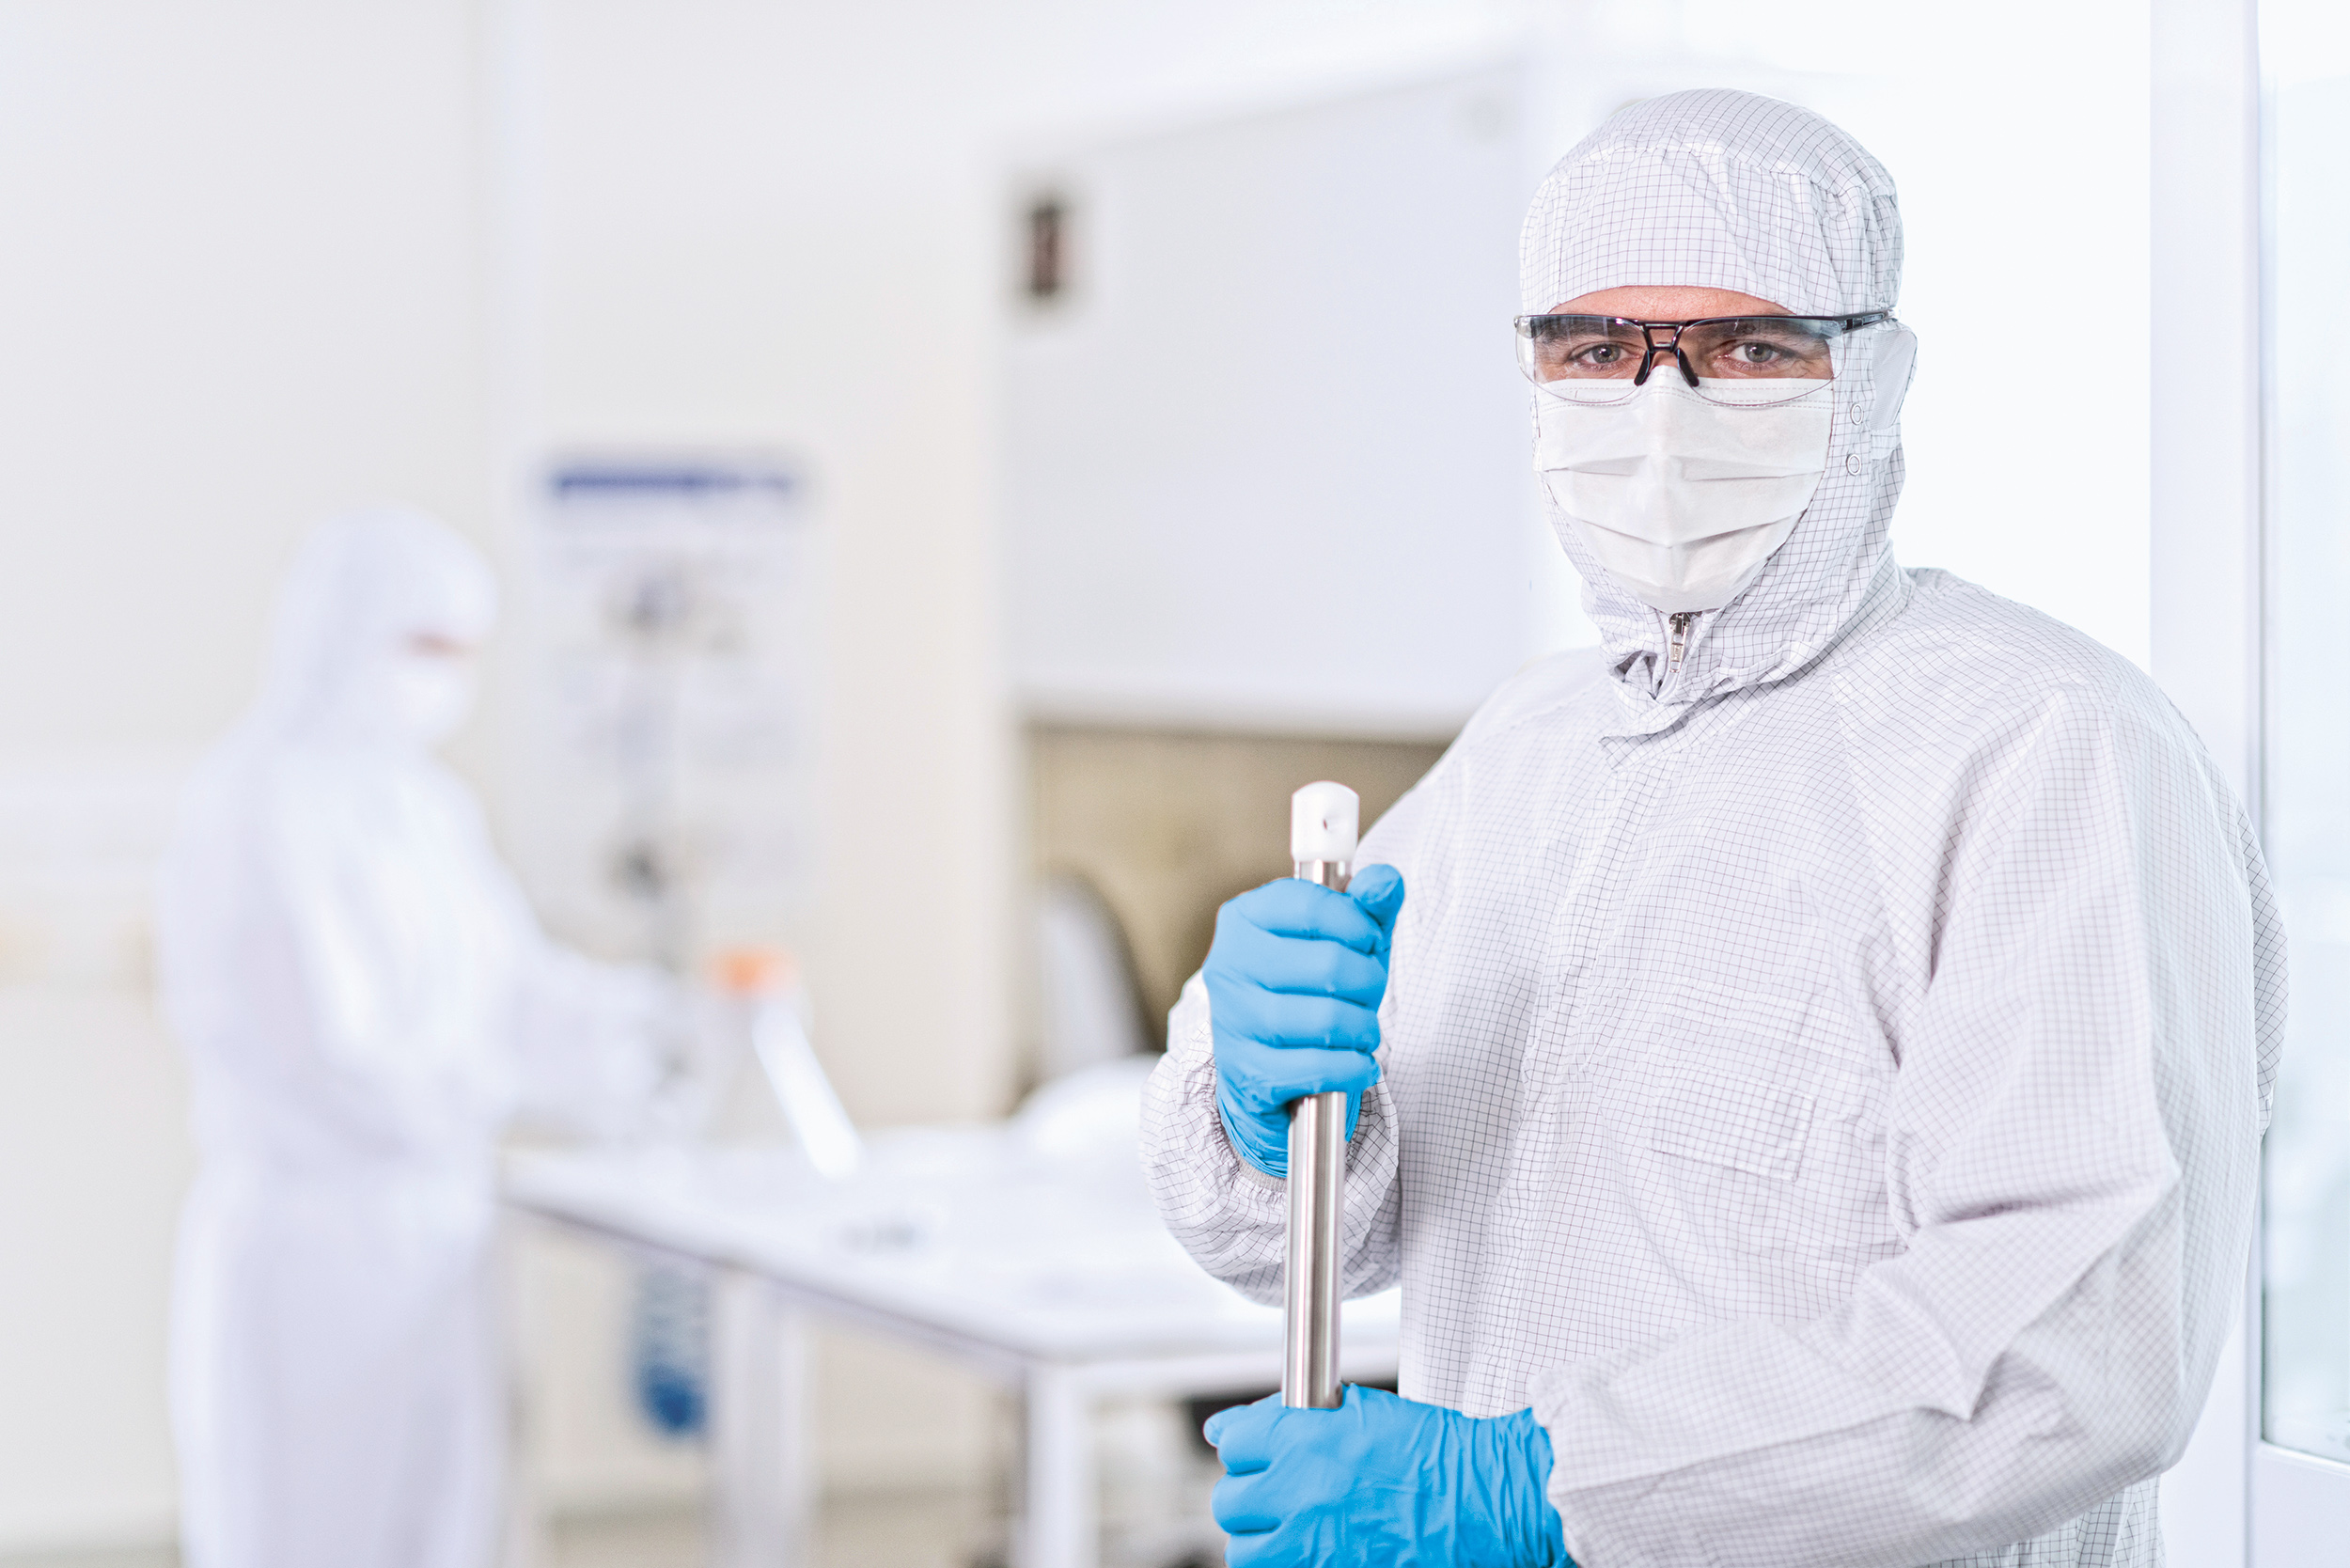 An employee wears a protective suit to work in the cleanroom